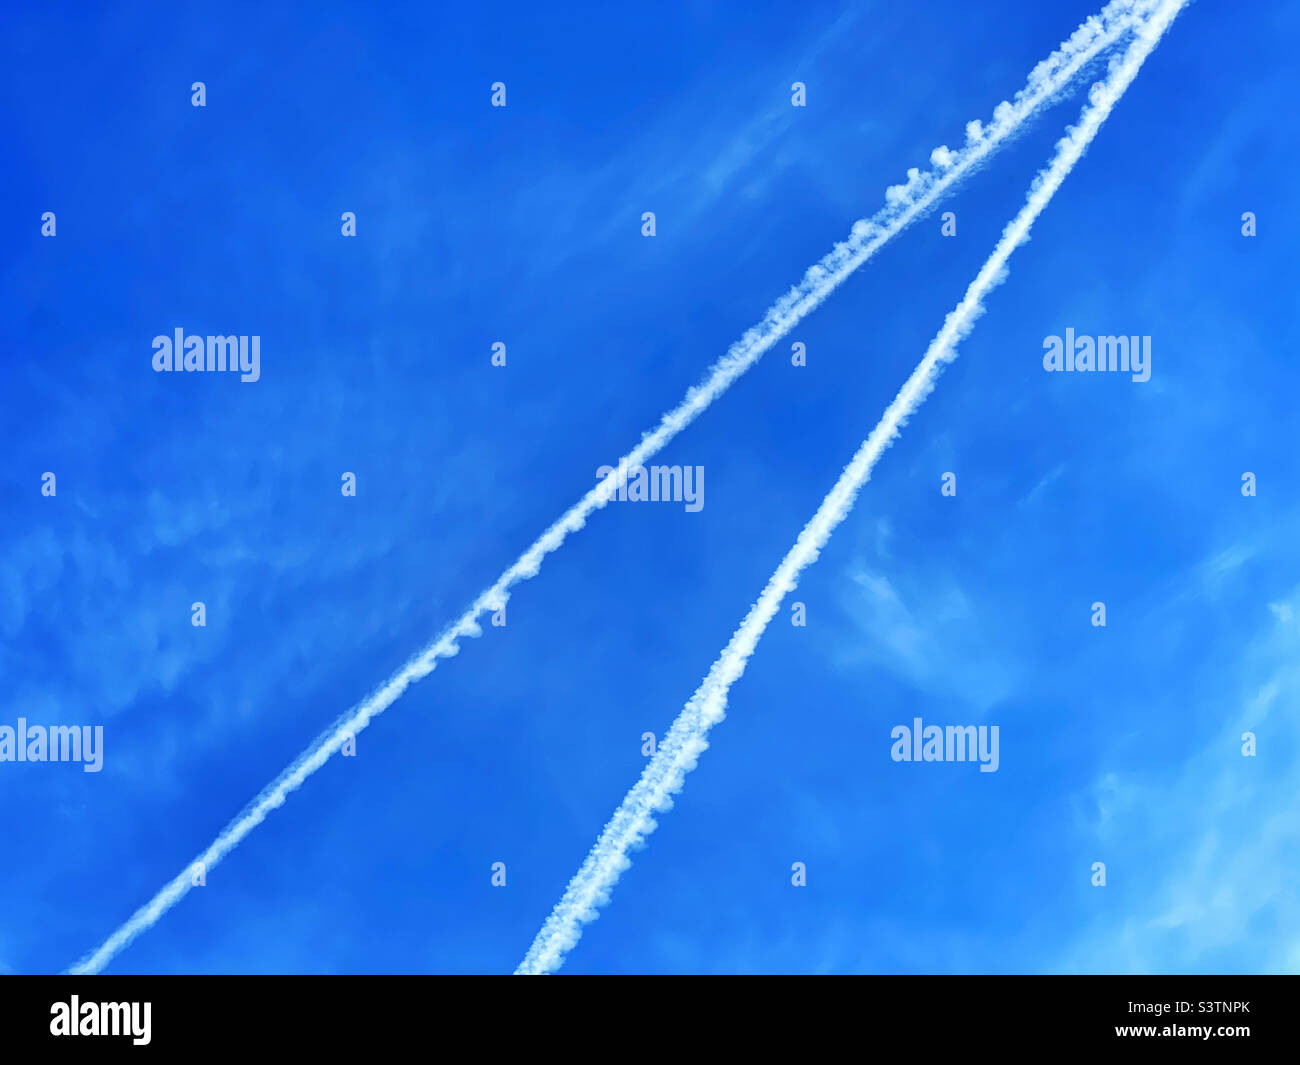 Two vapour trails in a blue sky. An abstract image of aviation. Did those aircraft collide? Have a near miss? Cross over with plenty of time to spare? Photo ©️ COLIN HOSKINS. Stock Photo